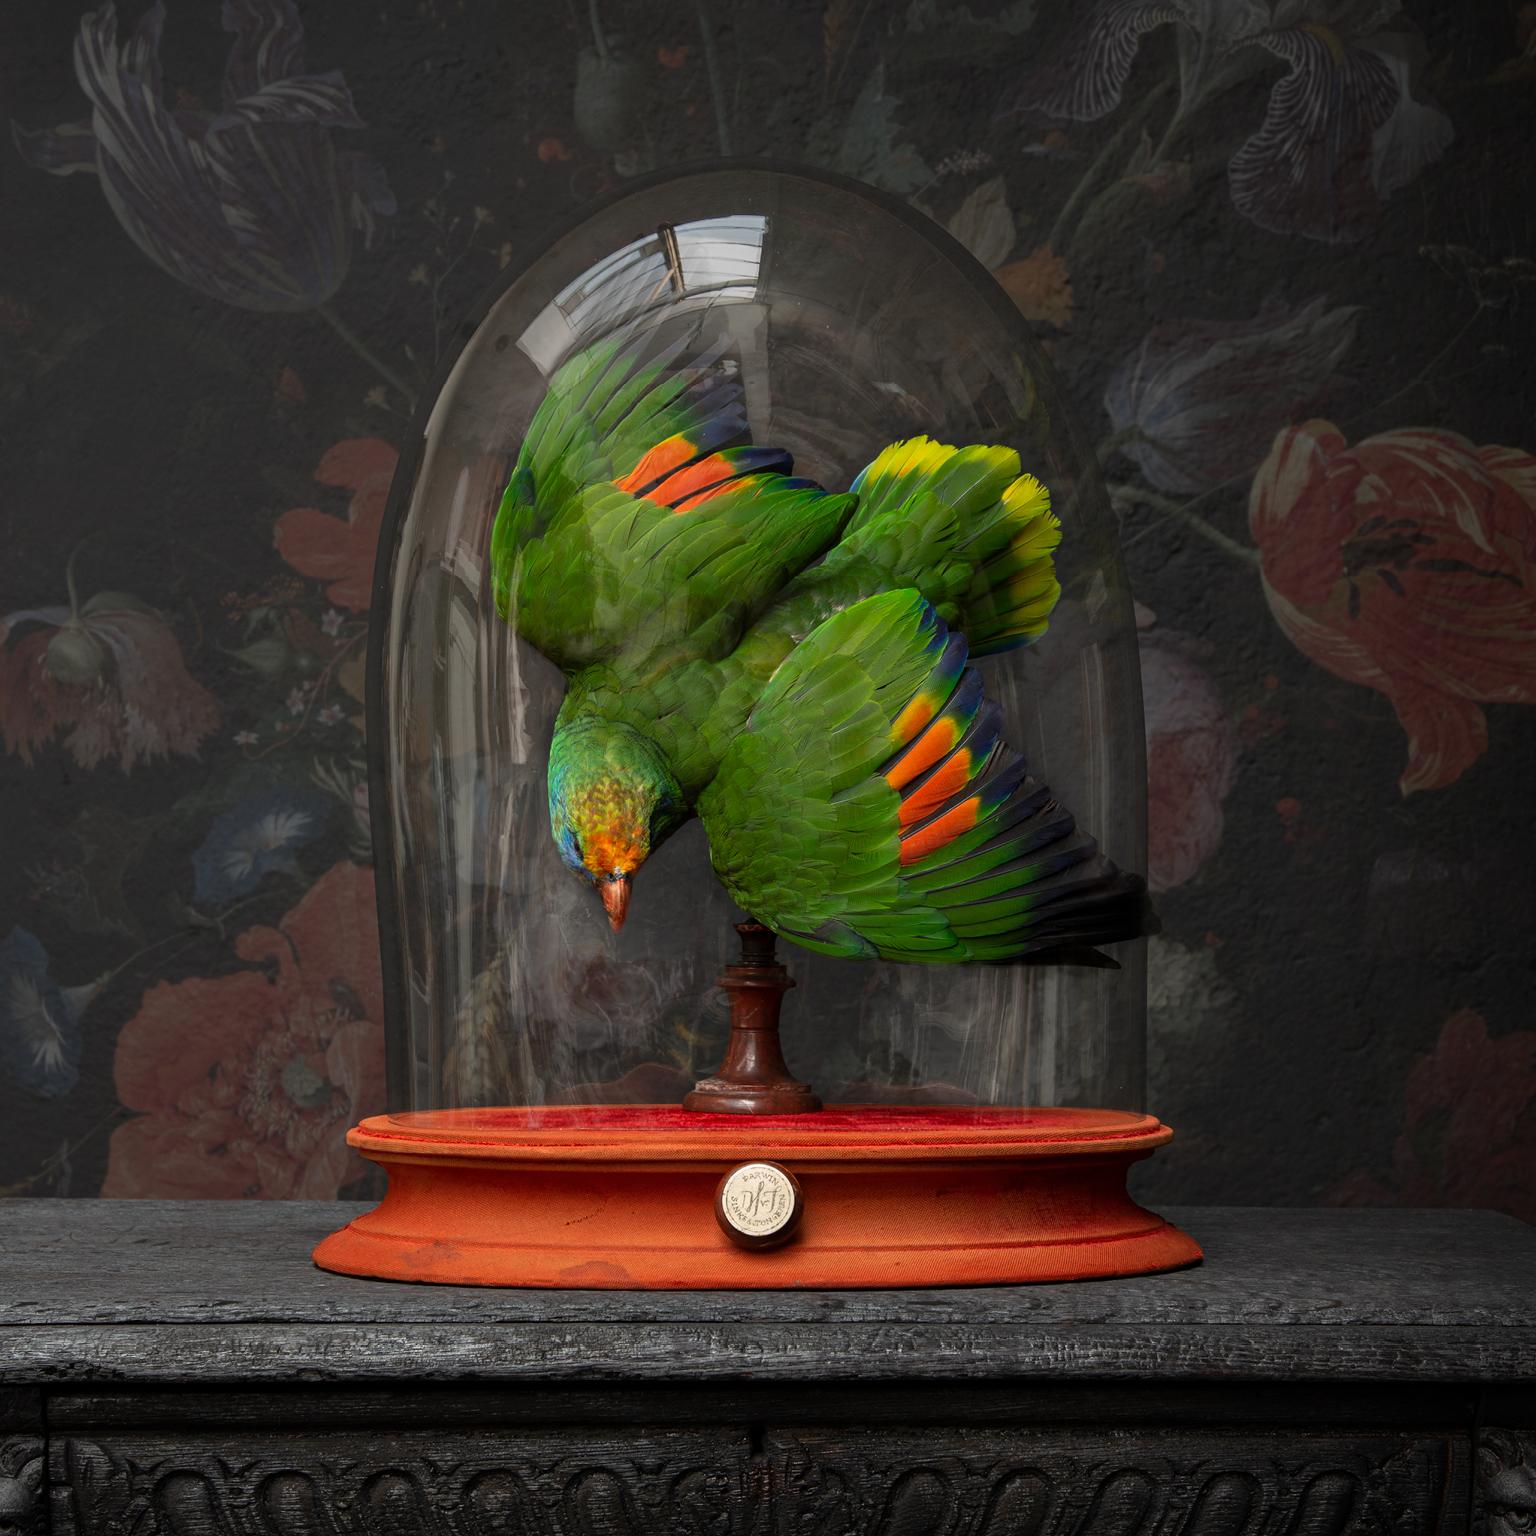 This tropical wonder has a lot to show off. It is created fan-shaped so it enables him to do just that. It floats under an antique oval glass dome resting on an early 19th century velvet base.

Note. All animals used for their work came from